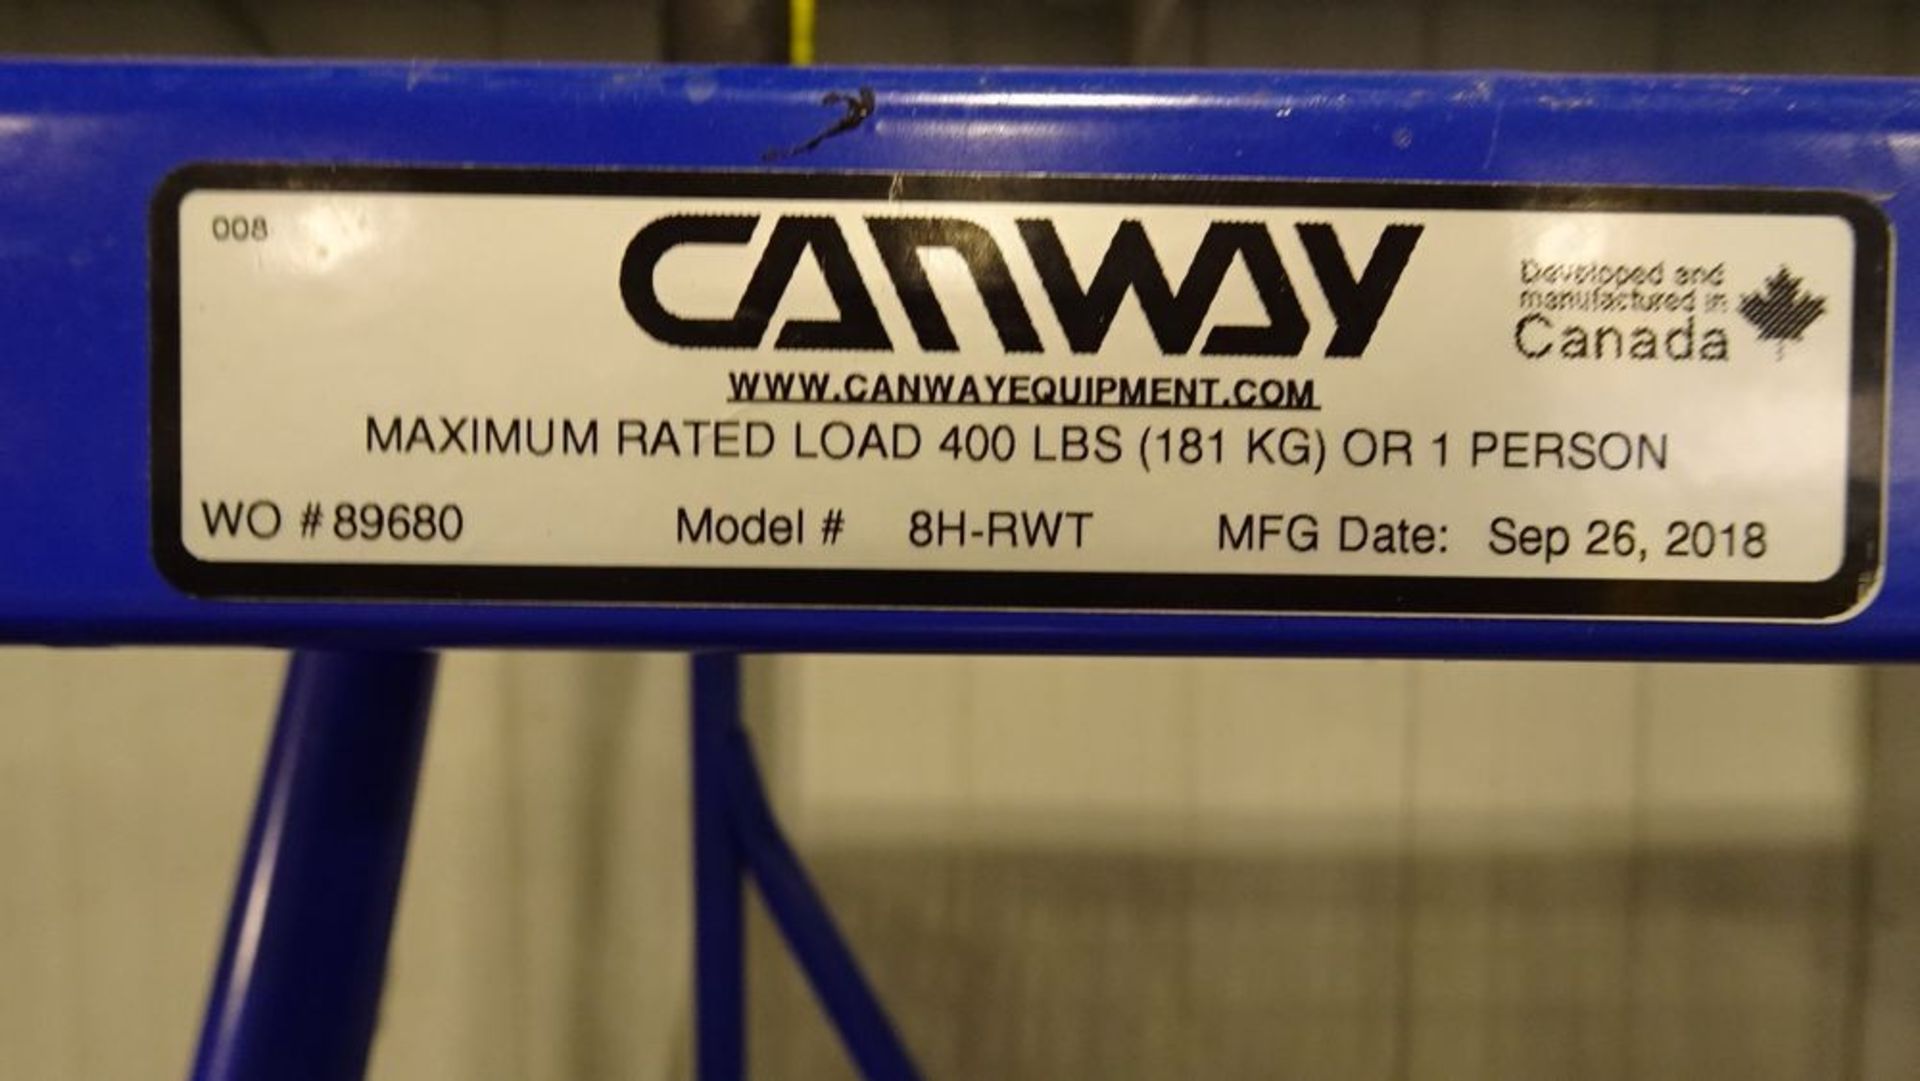 2018 CANWAY 8H-LWT PORTABLE WAREHOUSE LADDER (REUTER) - Image 2 of 2